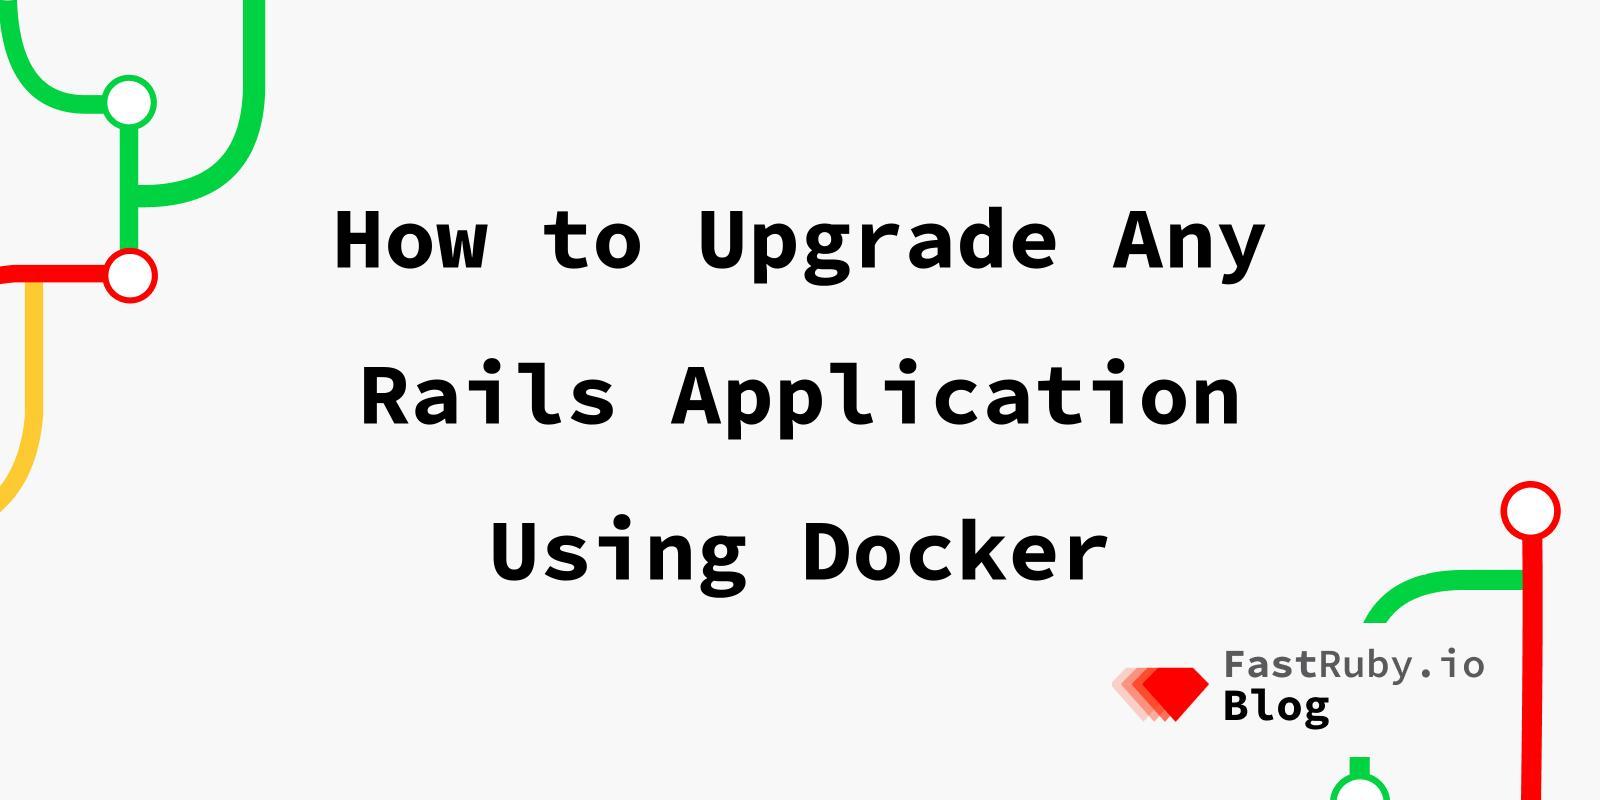 How to Upgrade Any Rails Application Using Docker